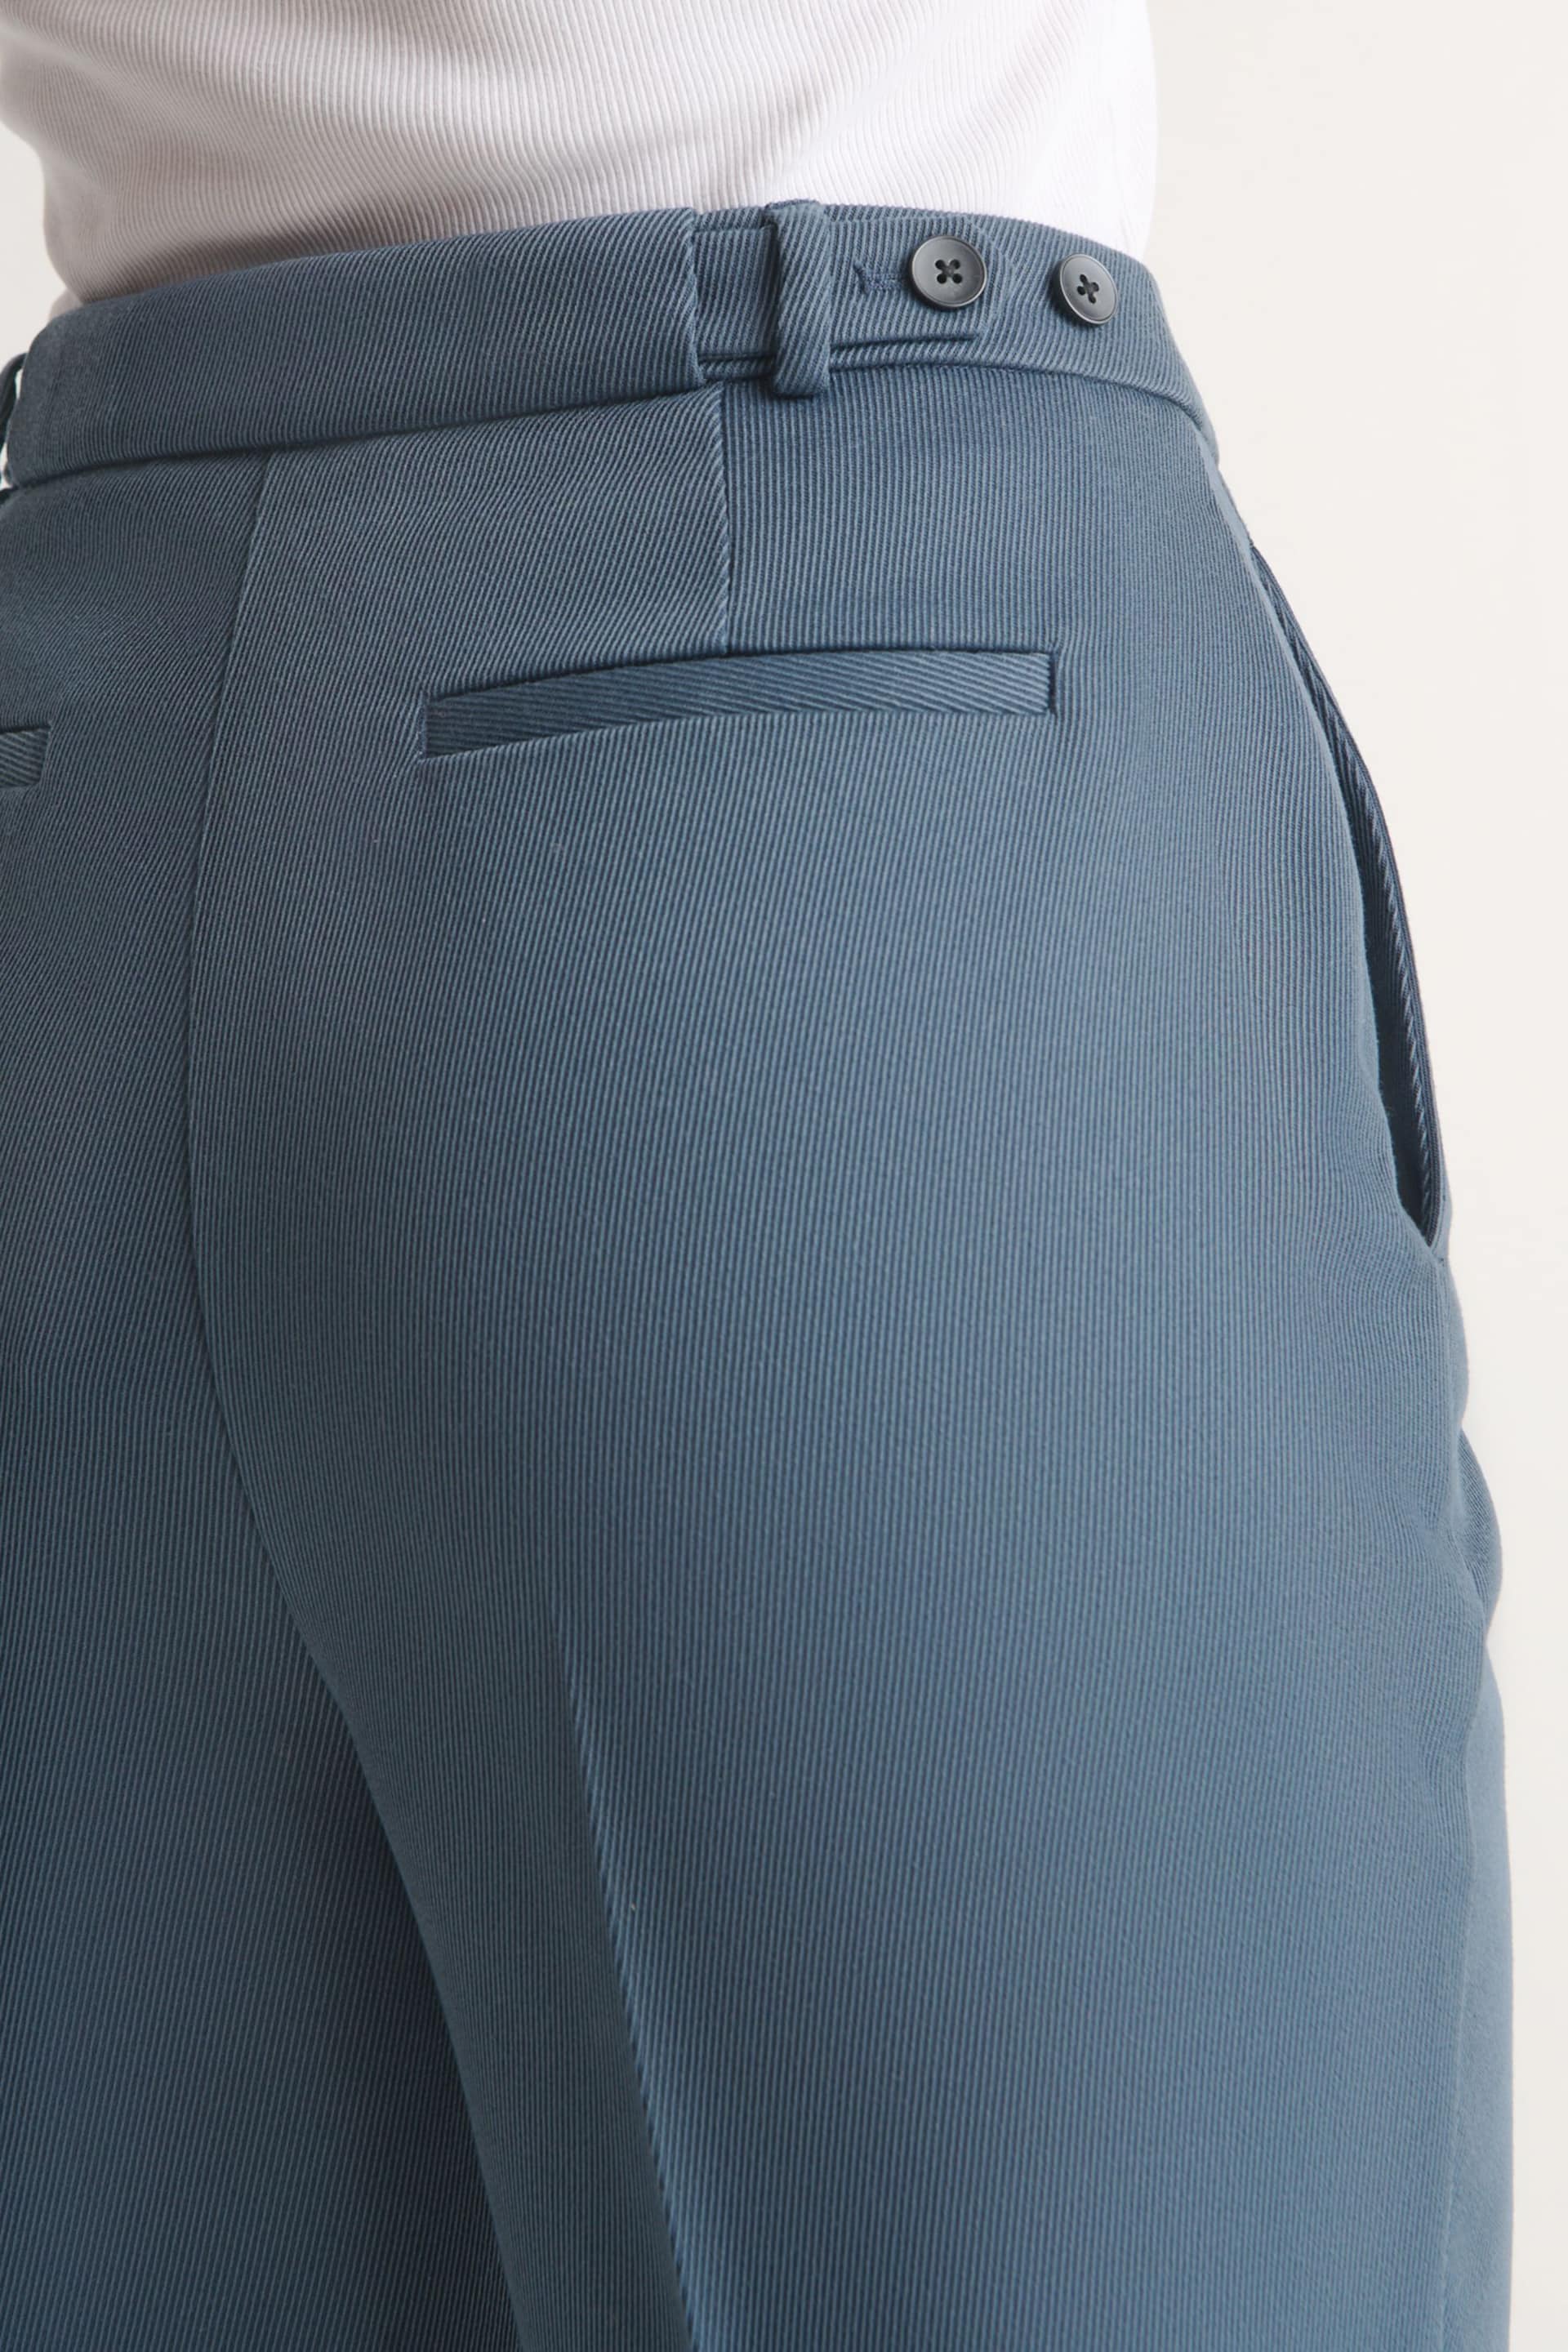 Blue Tailored Twill Straight Leg Trousers - Image 5 of 7